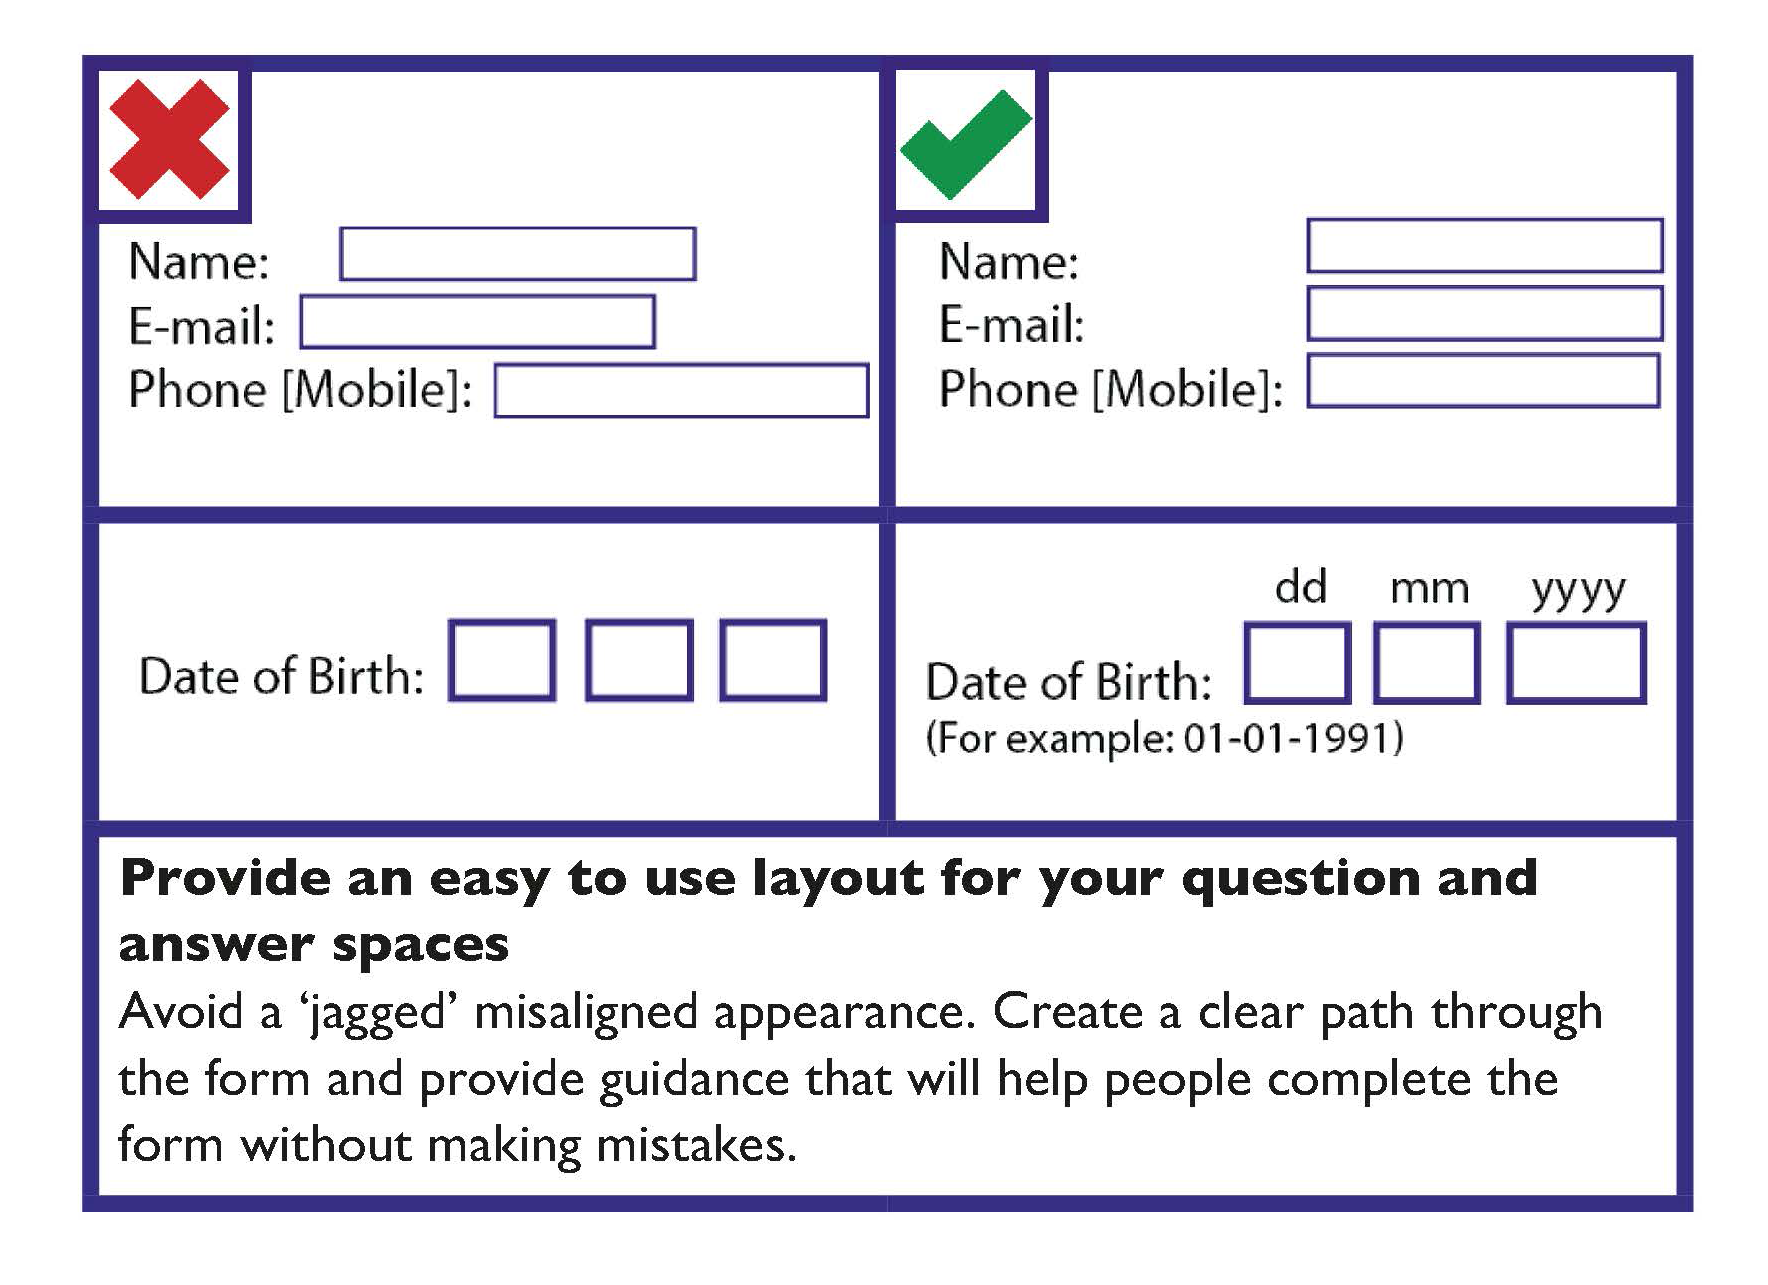 Example of good layout for online form design. Provide an easy to use layout for question and answer spaces. Avoid a jagged misaligned appearance. Create a clear path through the form and provide guidance that will help people complete the form without mistakes.